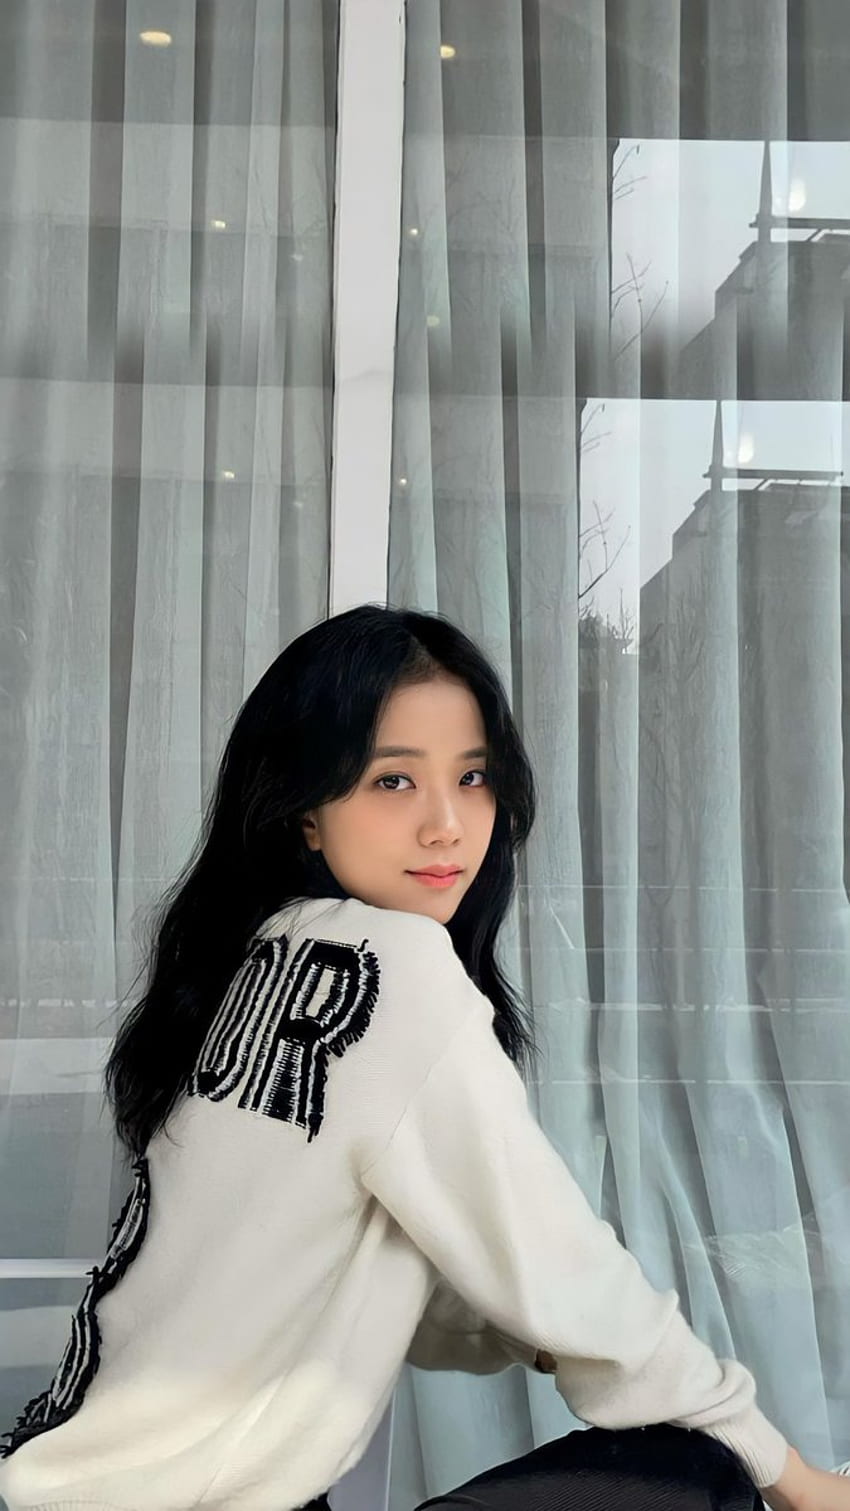 BLACKPINK - Kim jisoo new Ig post 031121 extended Follow for more, feel to use HD phone wallpaper